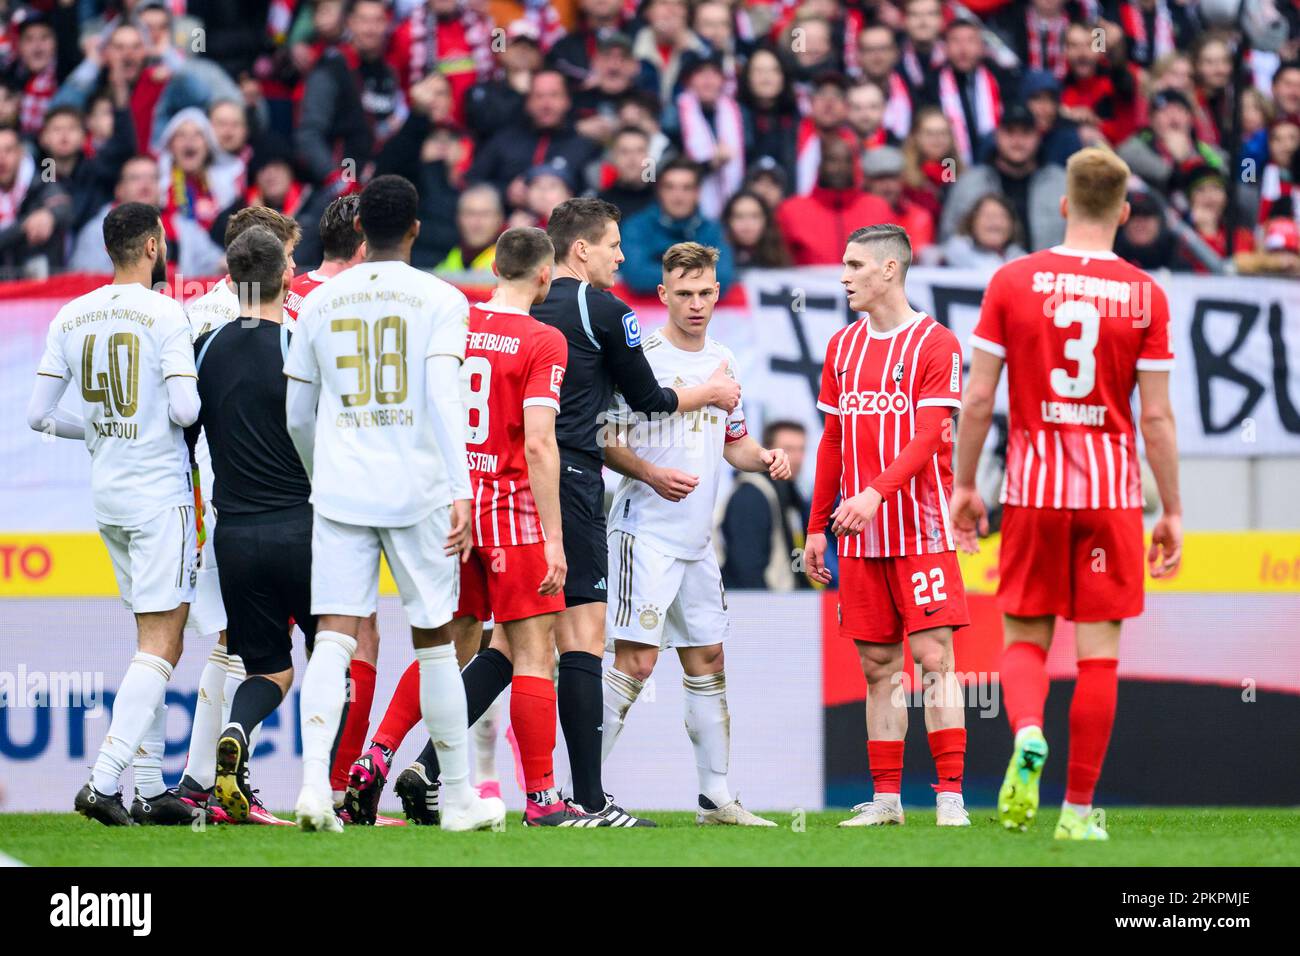 08 April 2023, Friburgo;: Still on the pitch at the Europa-Park Stadion, Bayern Munich captain Joshua Kimmich (third from right) was involved in a controversial action at the end of the match against Freiburg in the 27th round of the Bundesliga. Photo: Tom Weller/dpa - IMPORTANT NOTICE: The DFL/DFB rules prohibit any use of photographs in the form of image sequences and/or quasi video Stock Photo